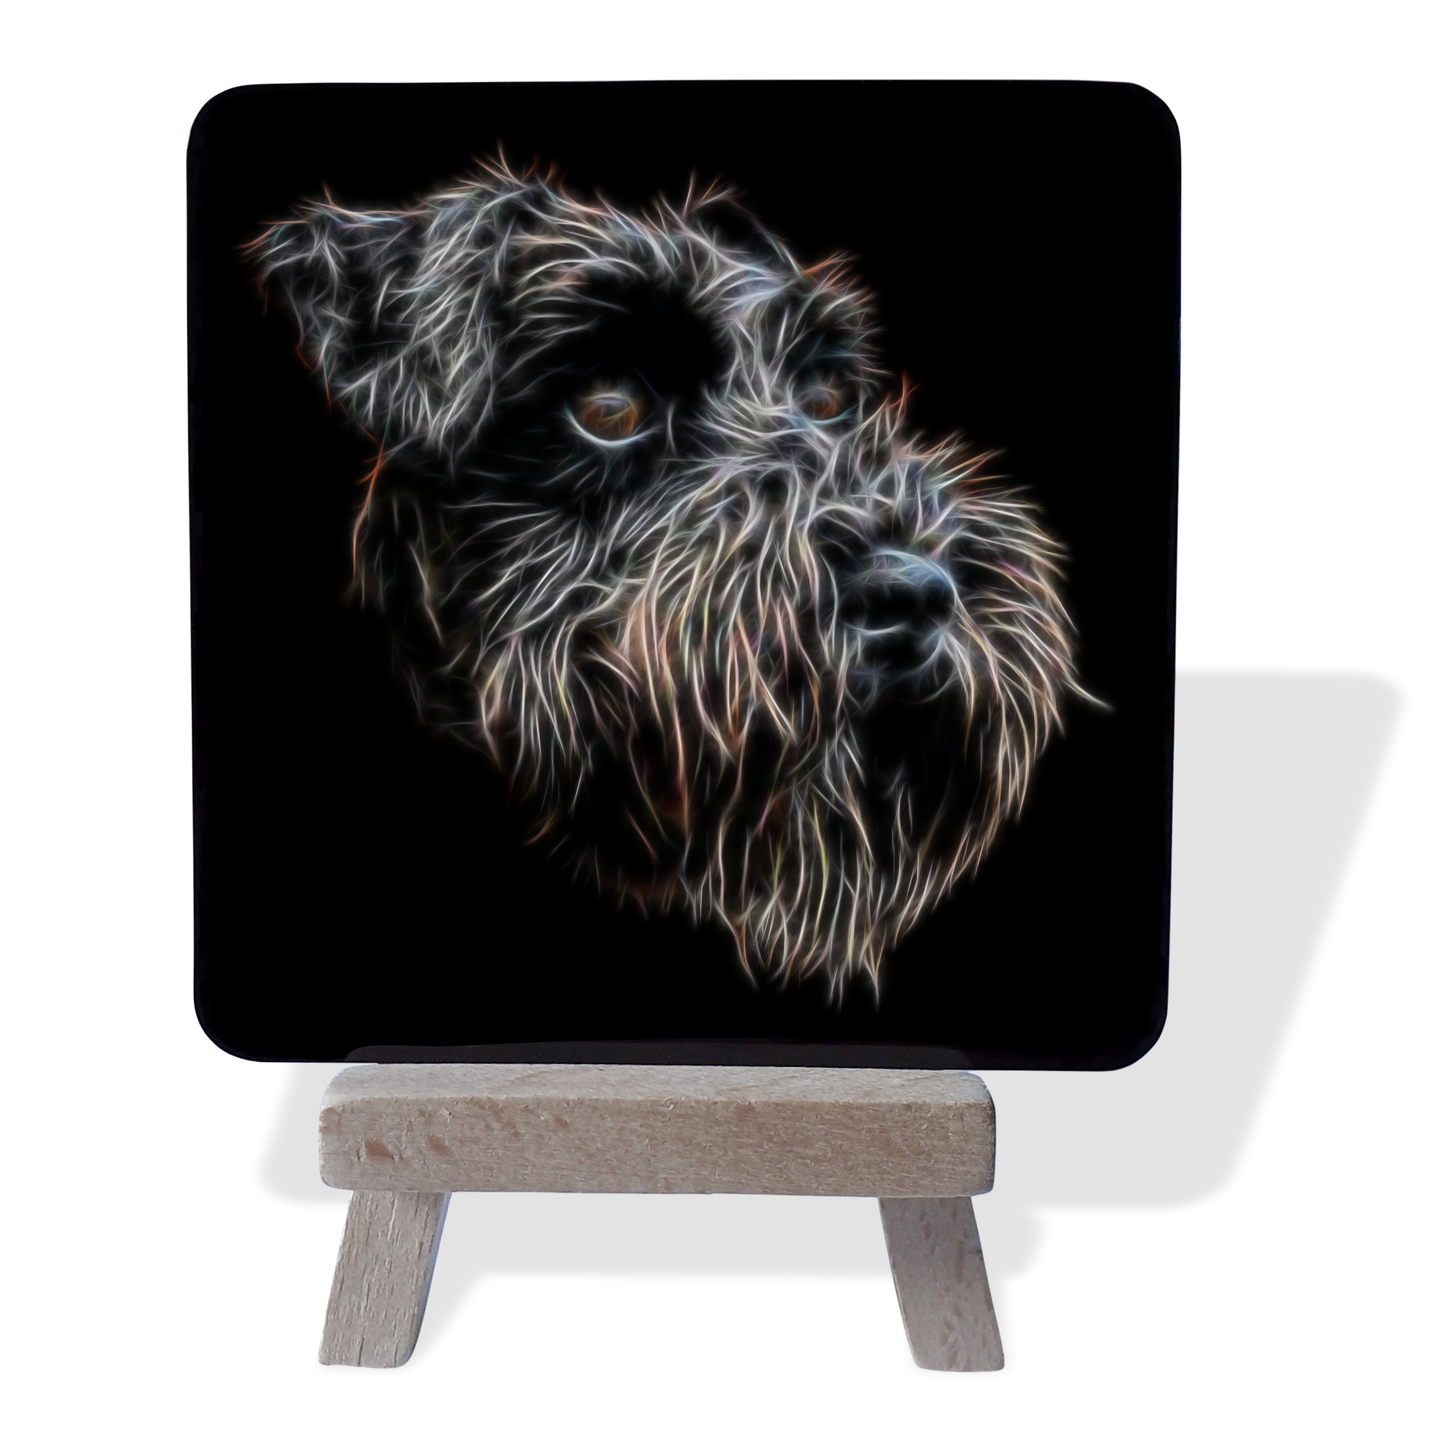 Black Schnauzer #3 Metal Plaque and Mini Easel with Fractal Art Design